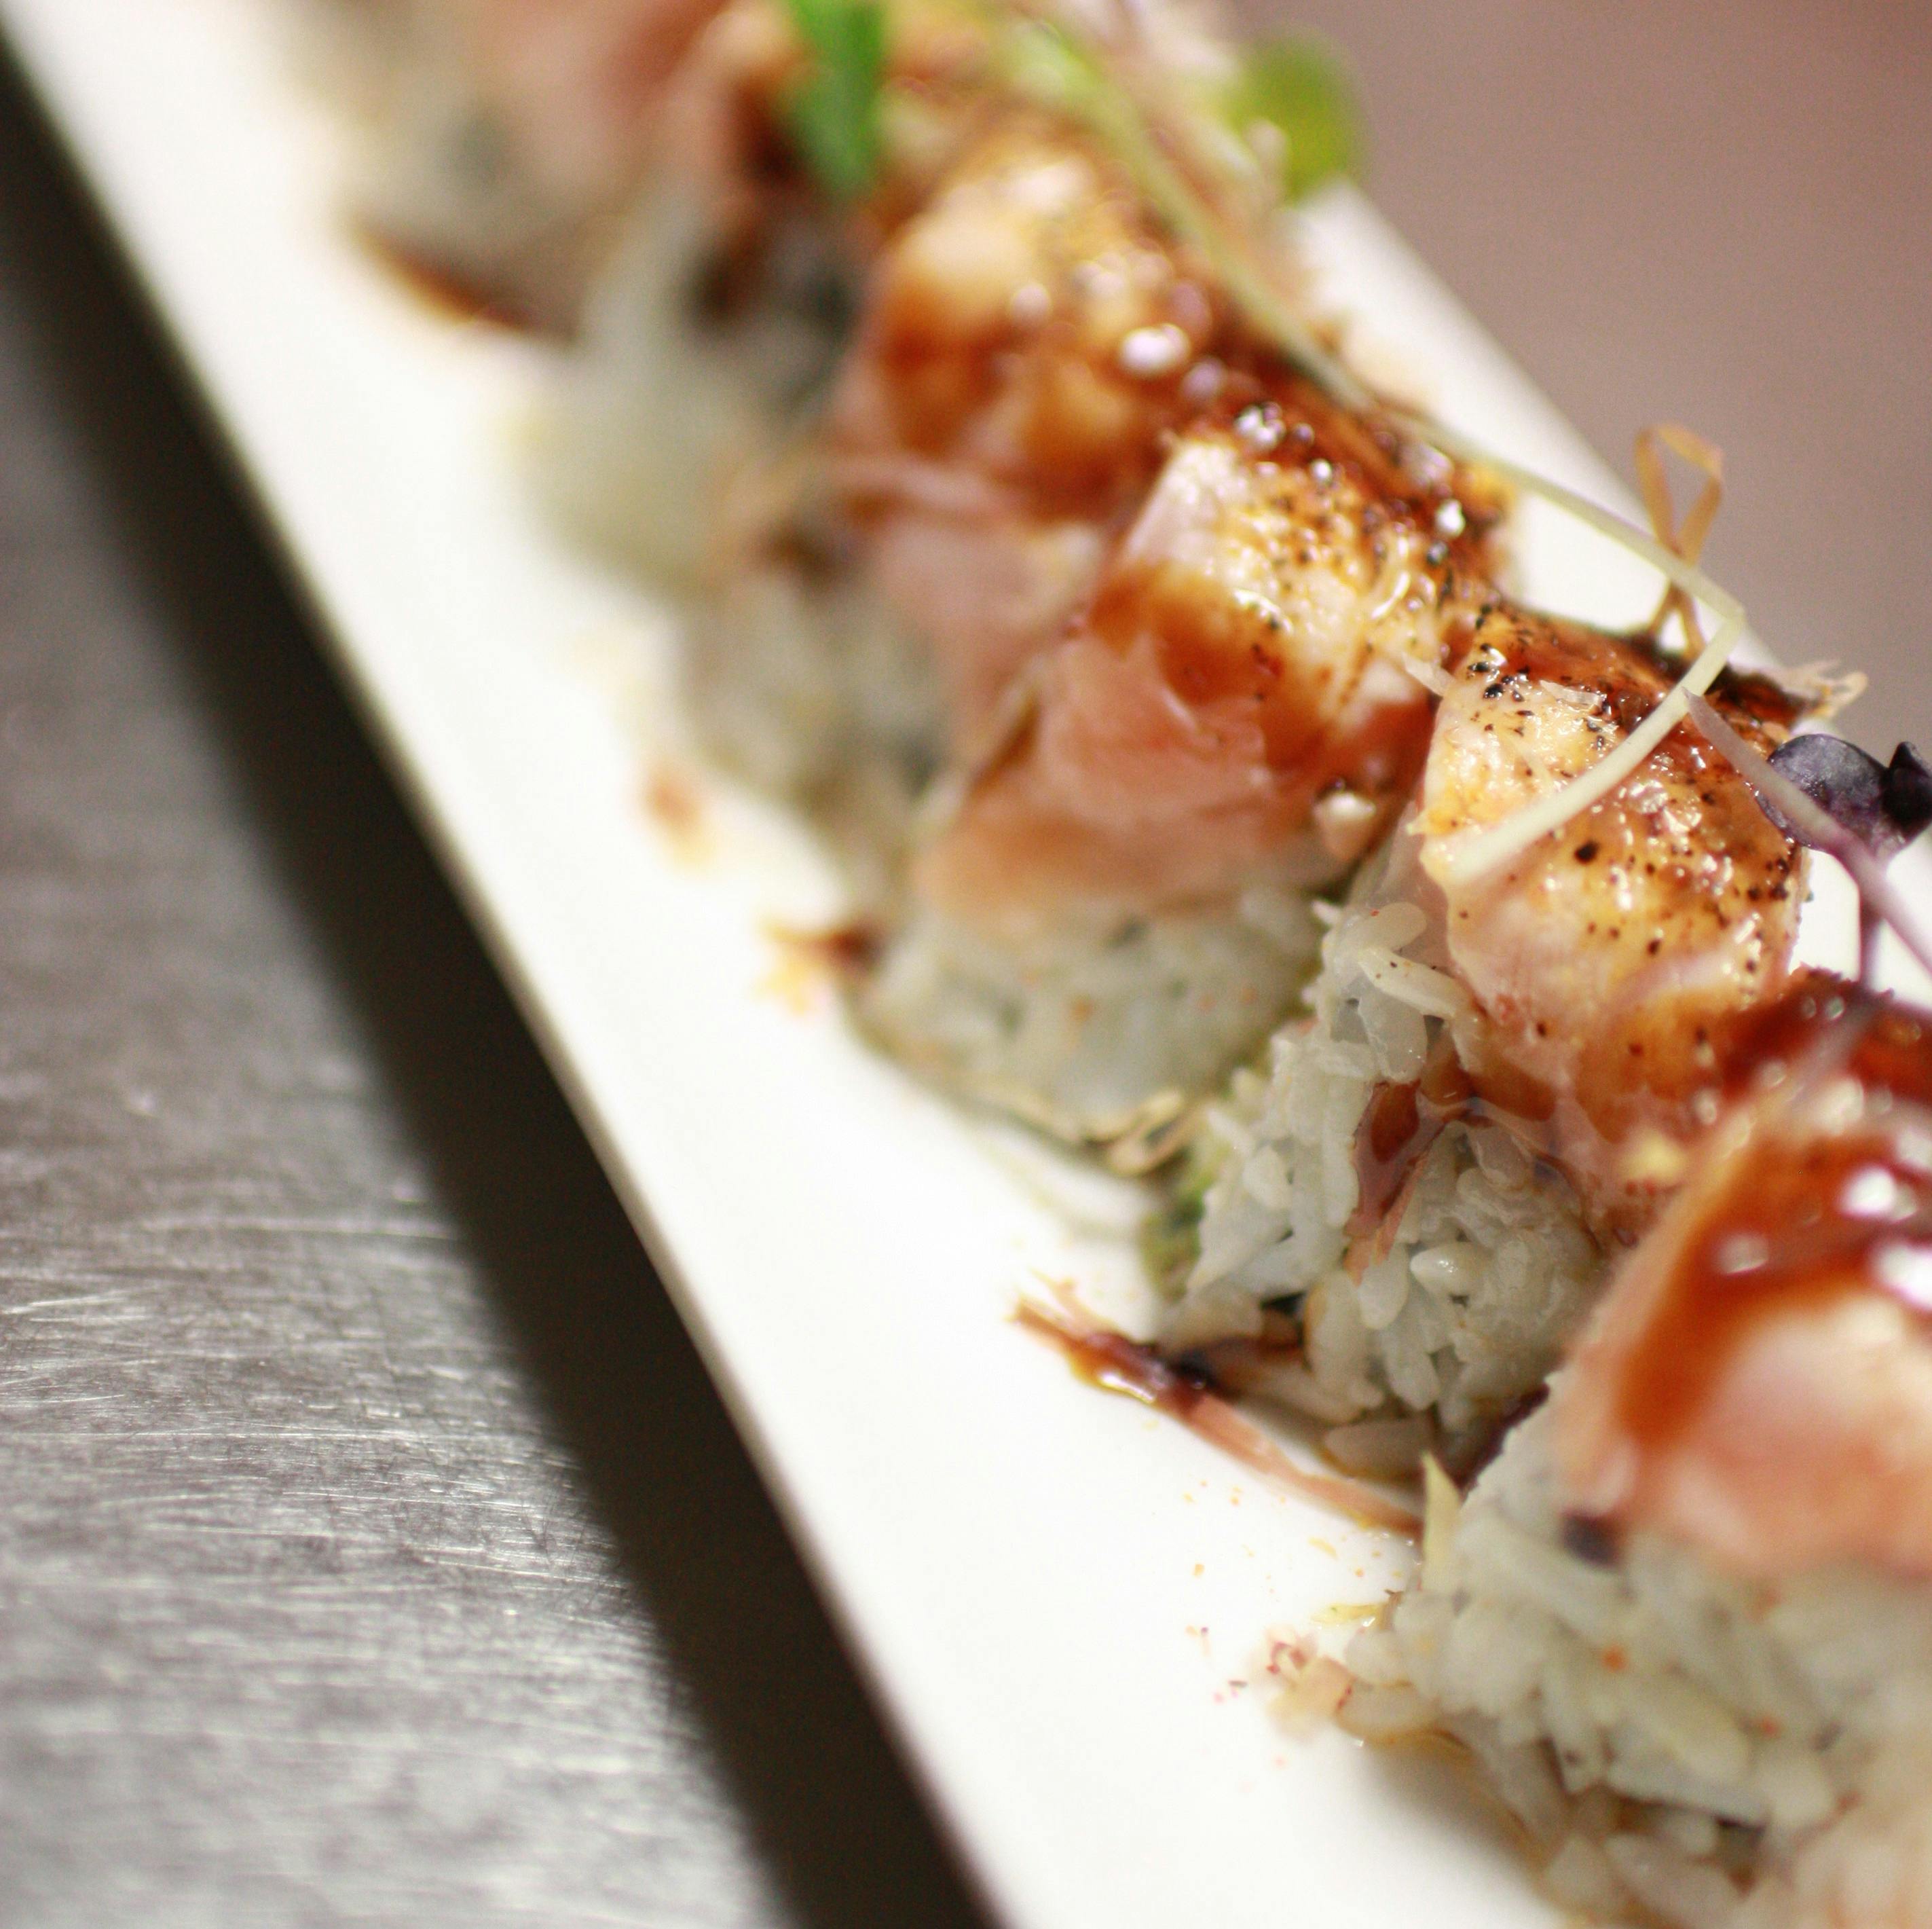 Torched Salmon Roll from Sequoia Ramen & Sushi Lounge in Madison, WI